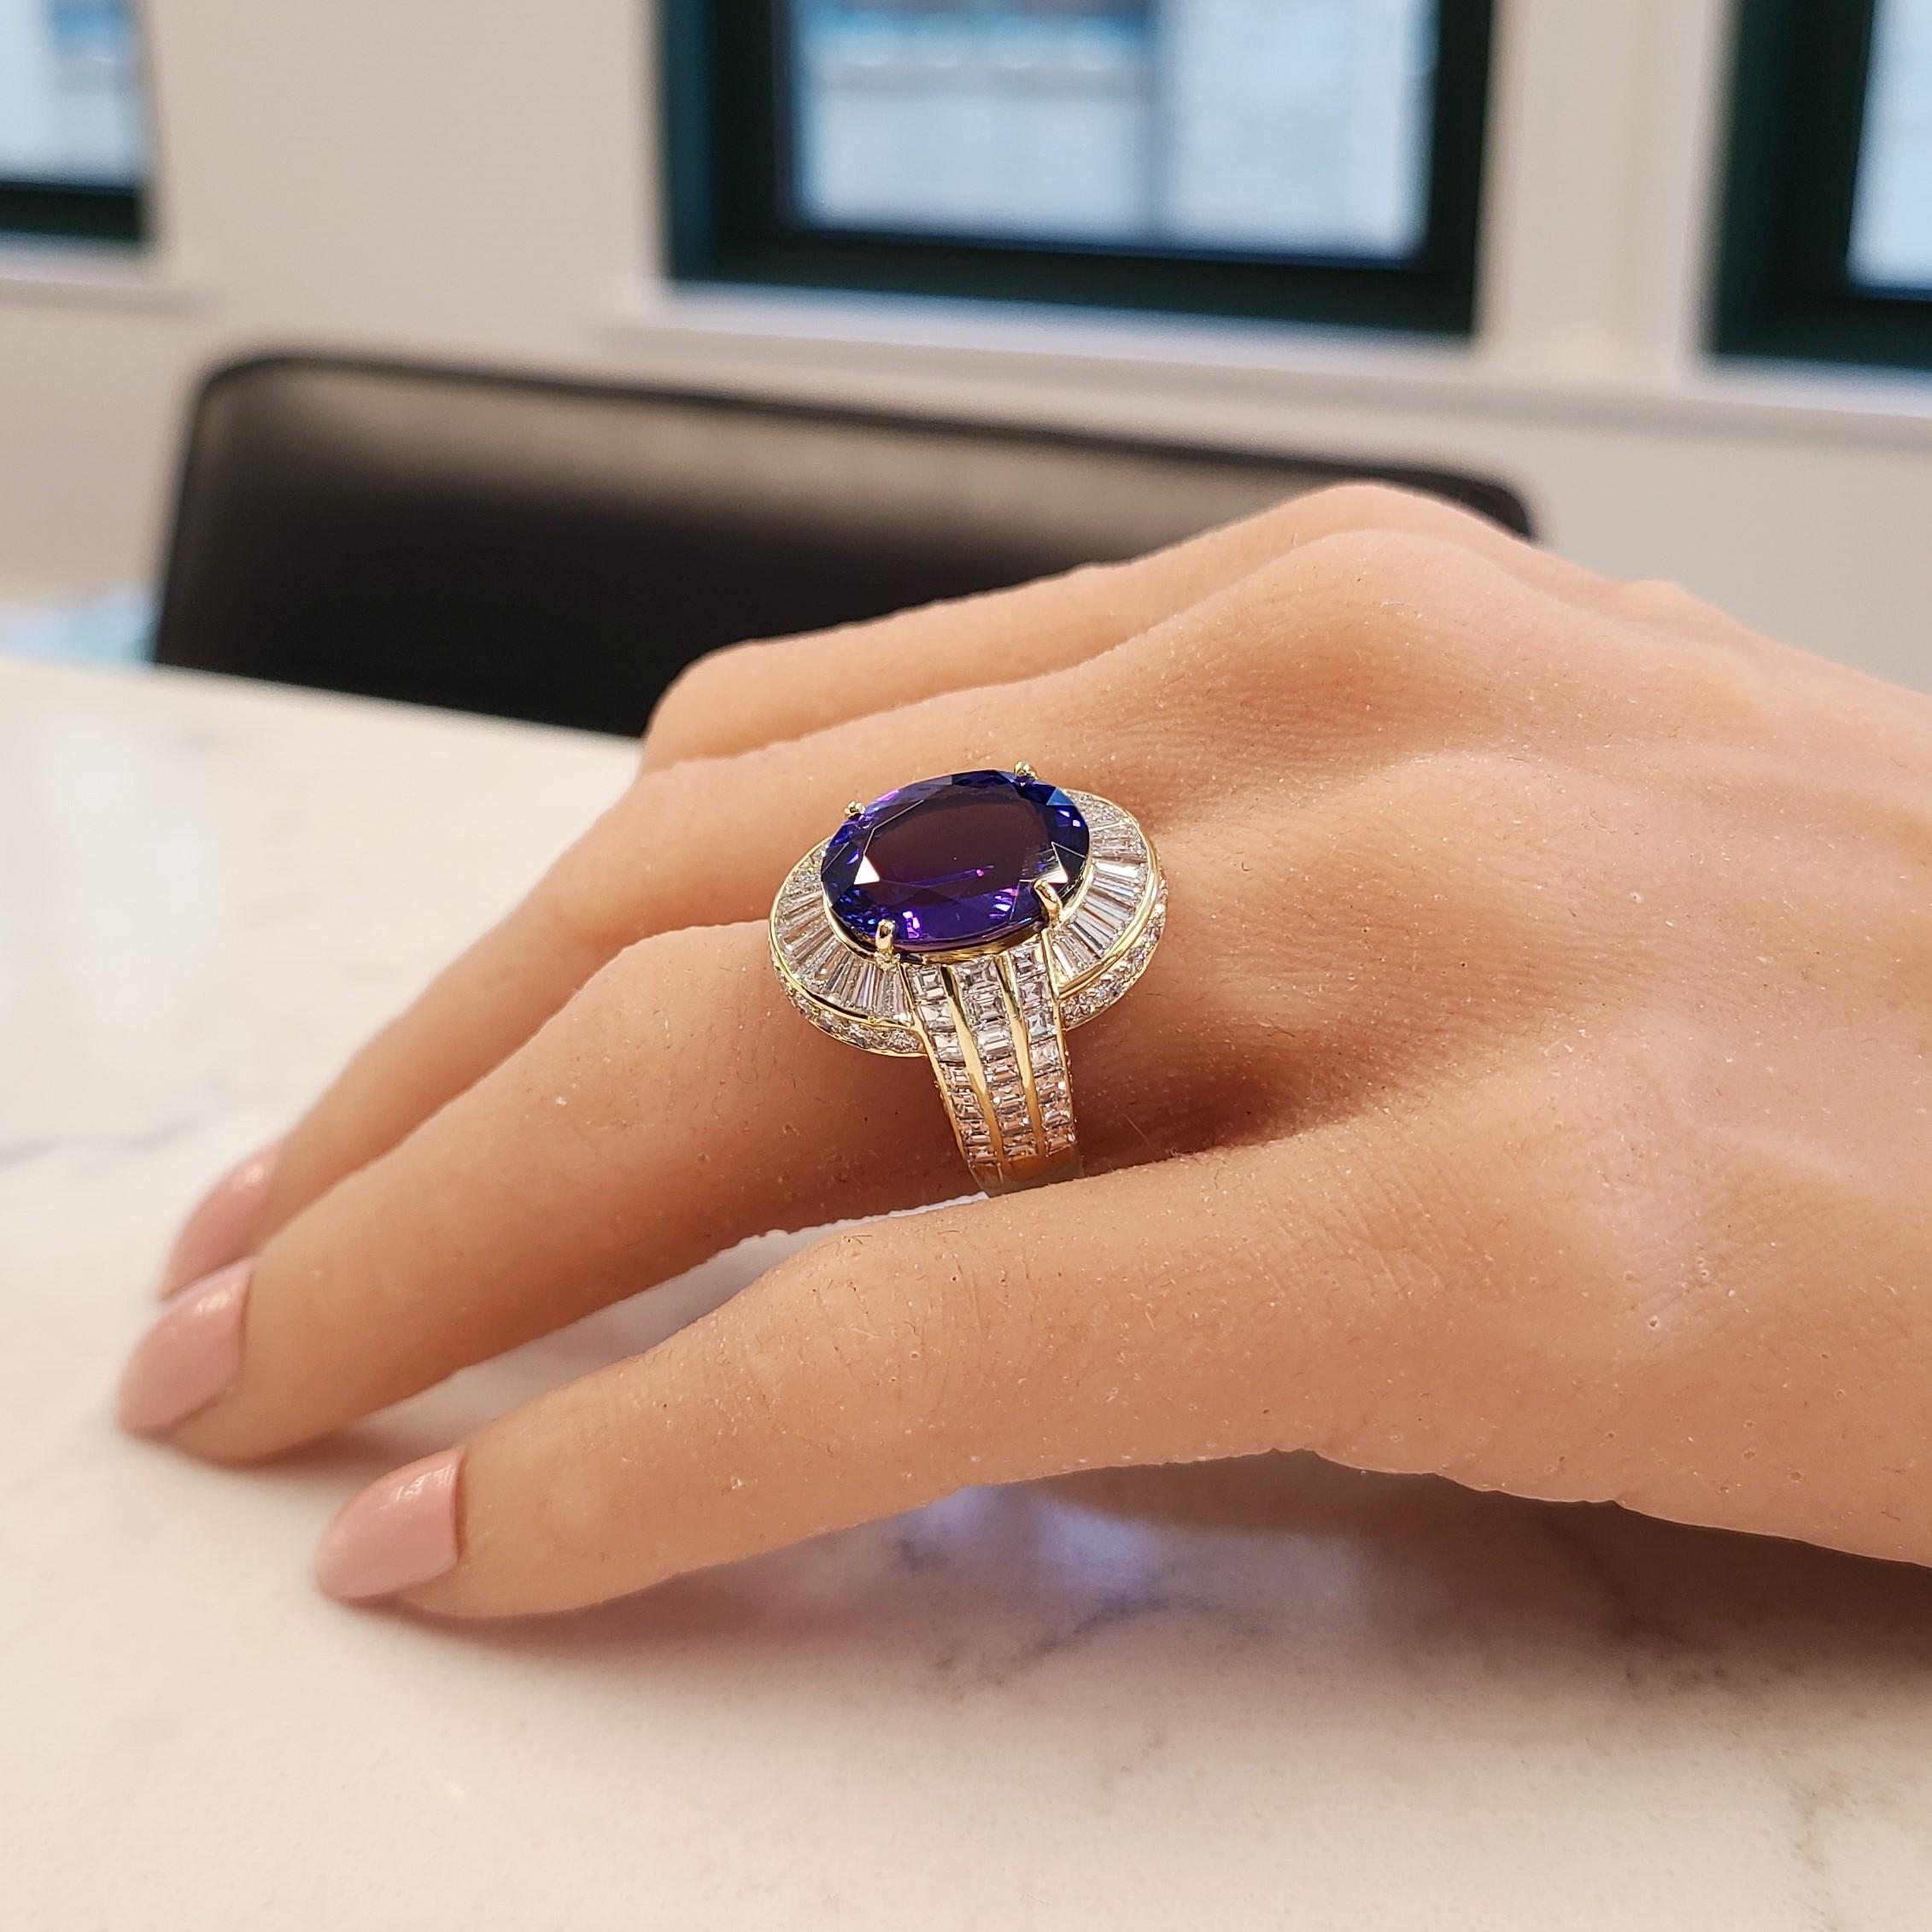 Celebrate every day in style with this stunning, brightly polished 18k yellow gold tanzanite diamond ring! This gorgeous ring features an oval cut tanzanite that measures 14.90mmx1090mm and weighs 8.73 carats. This fine quality tanzanite exhibits an